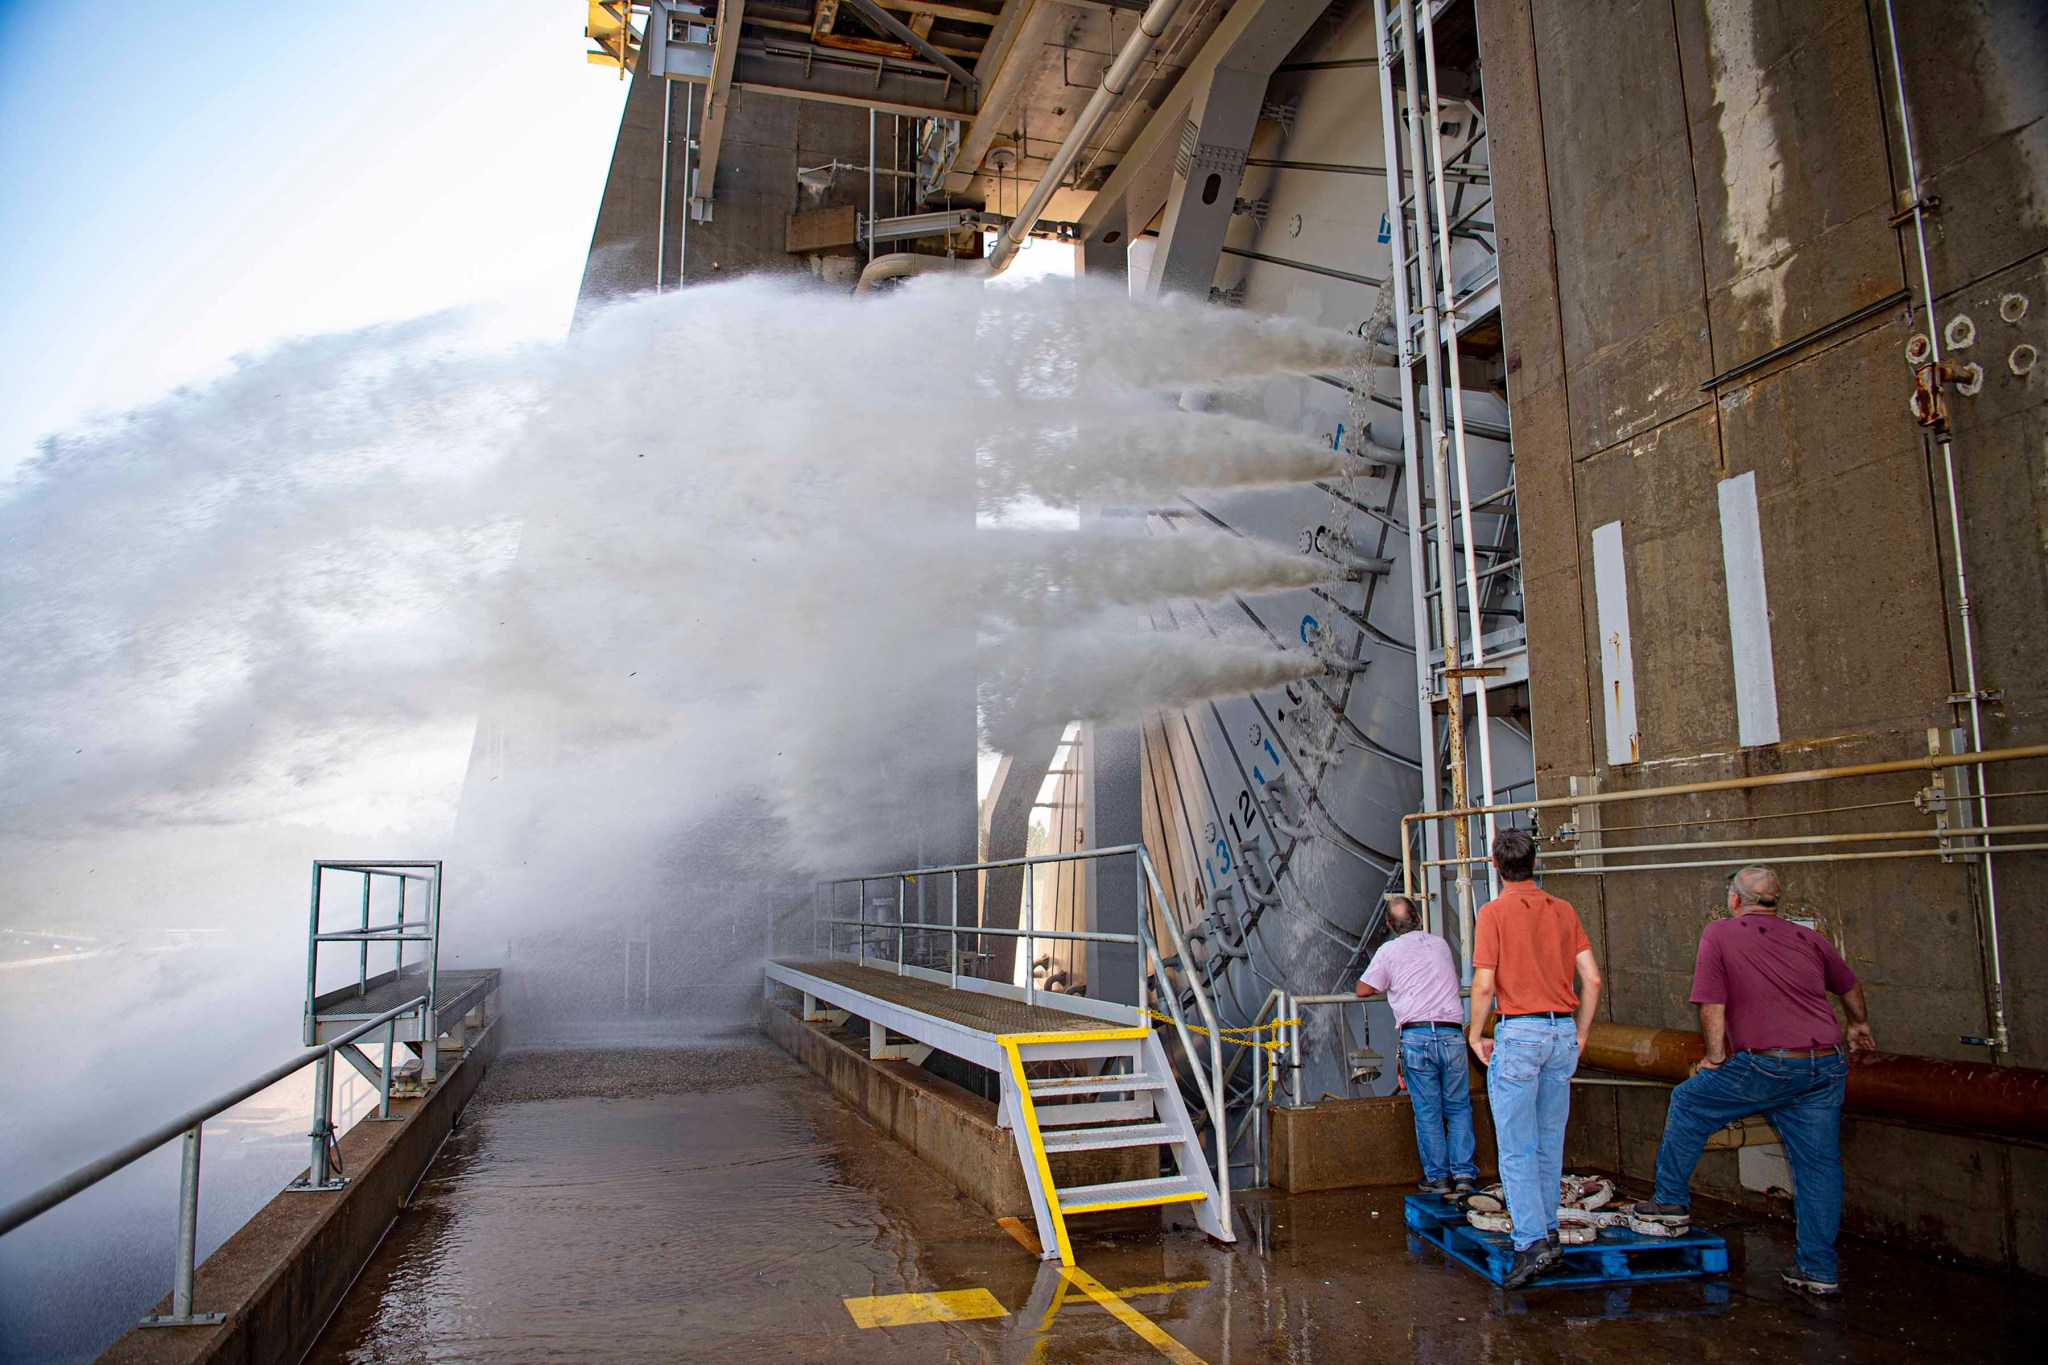 Engineers and technicians at NASA’s Stennis Space Center perform a water flush of the critical FIREX system at the Fred Haise Test Stand 